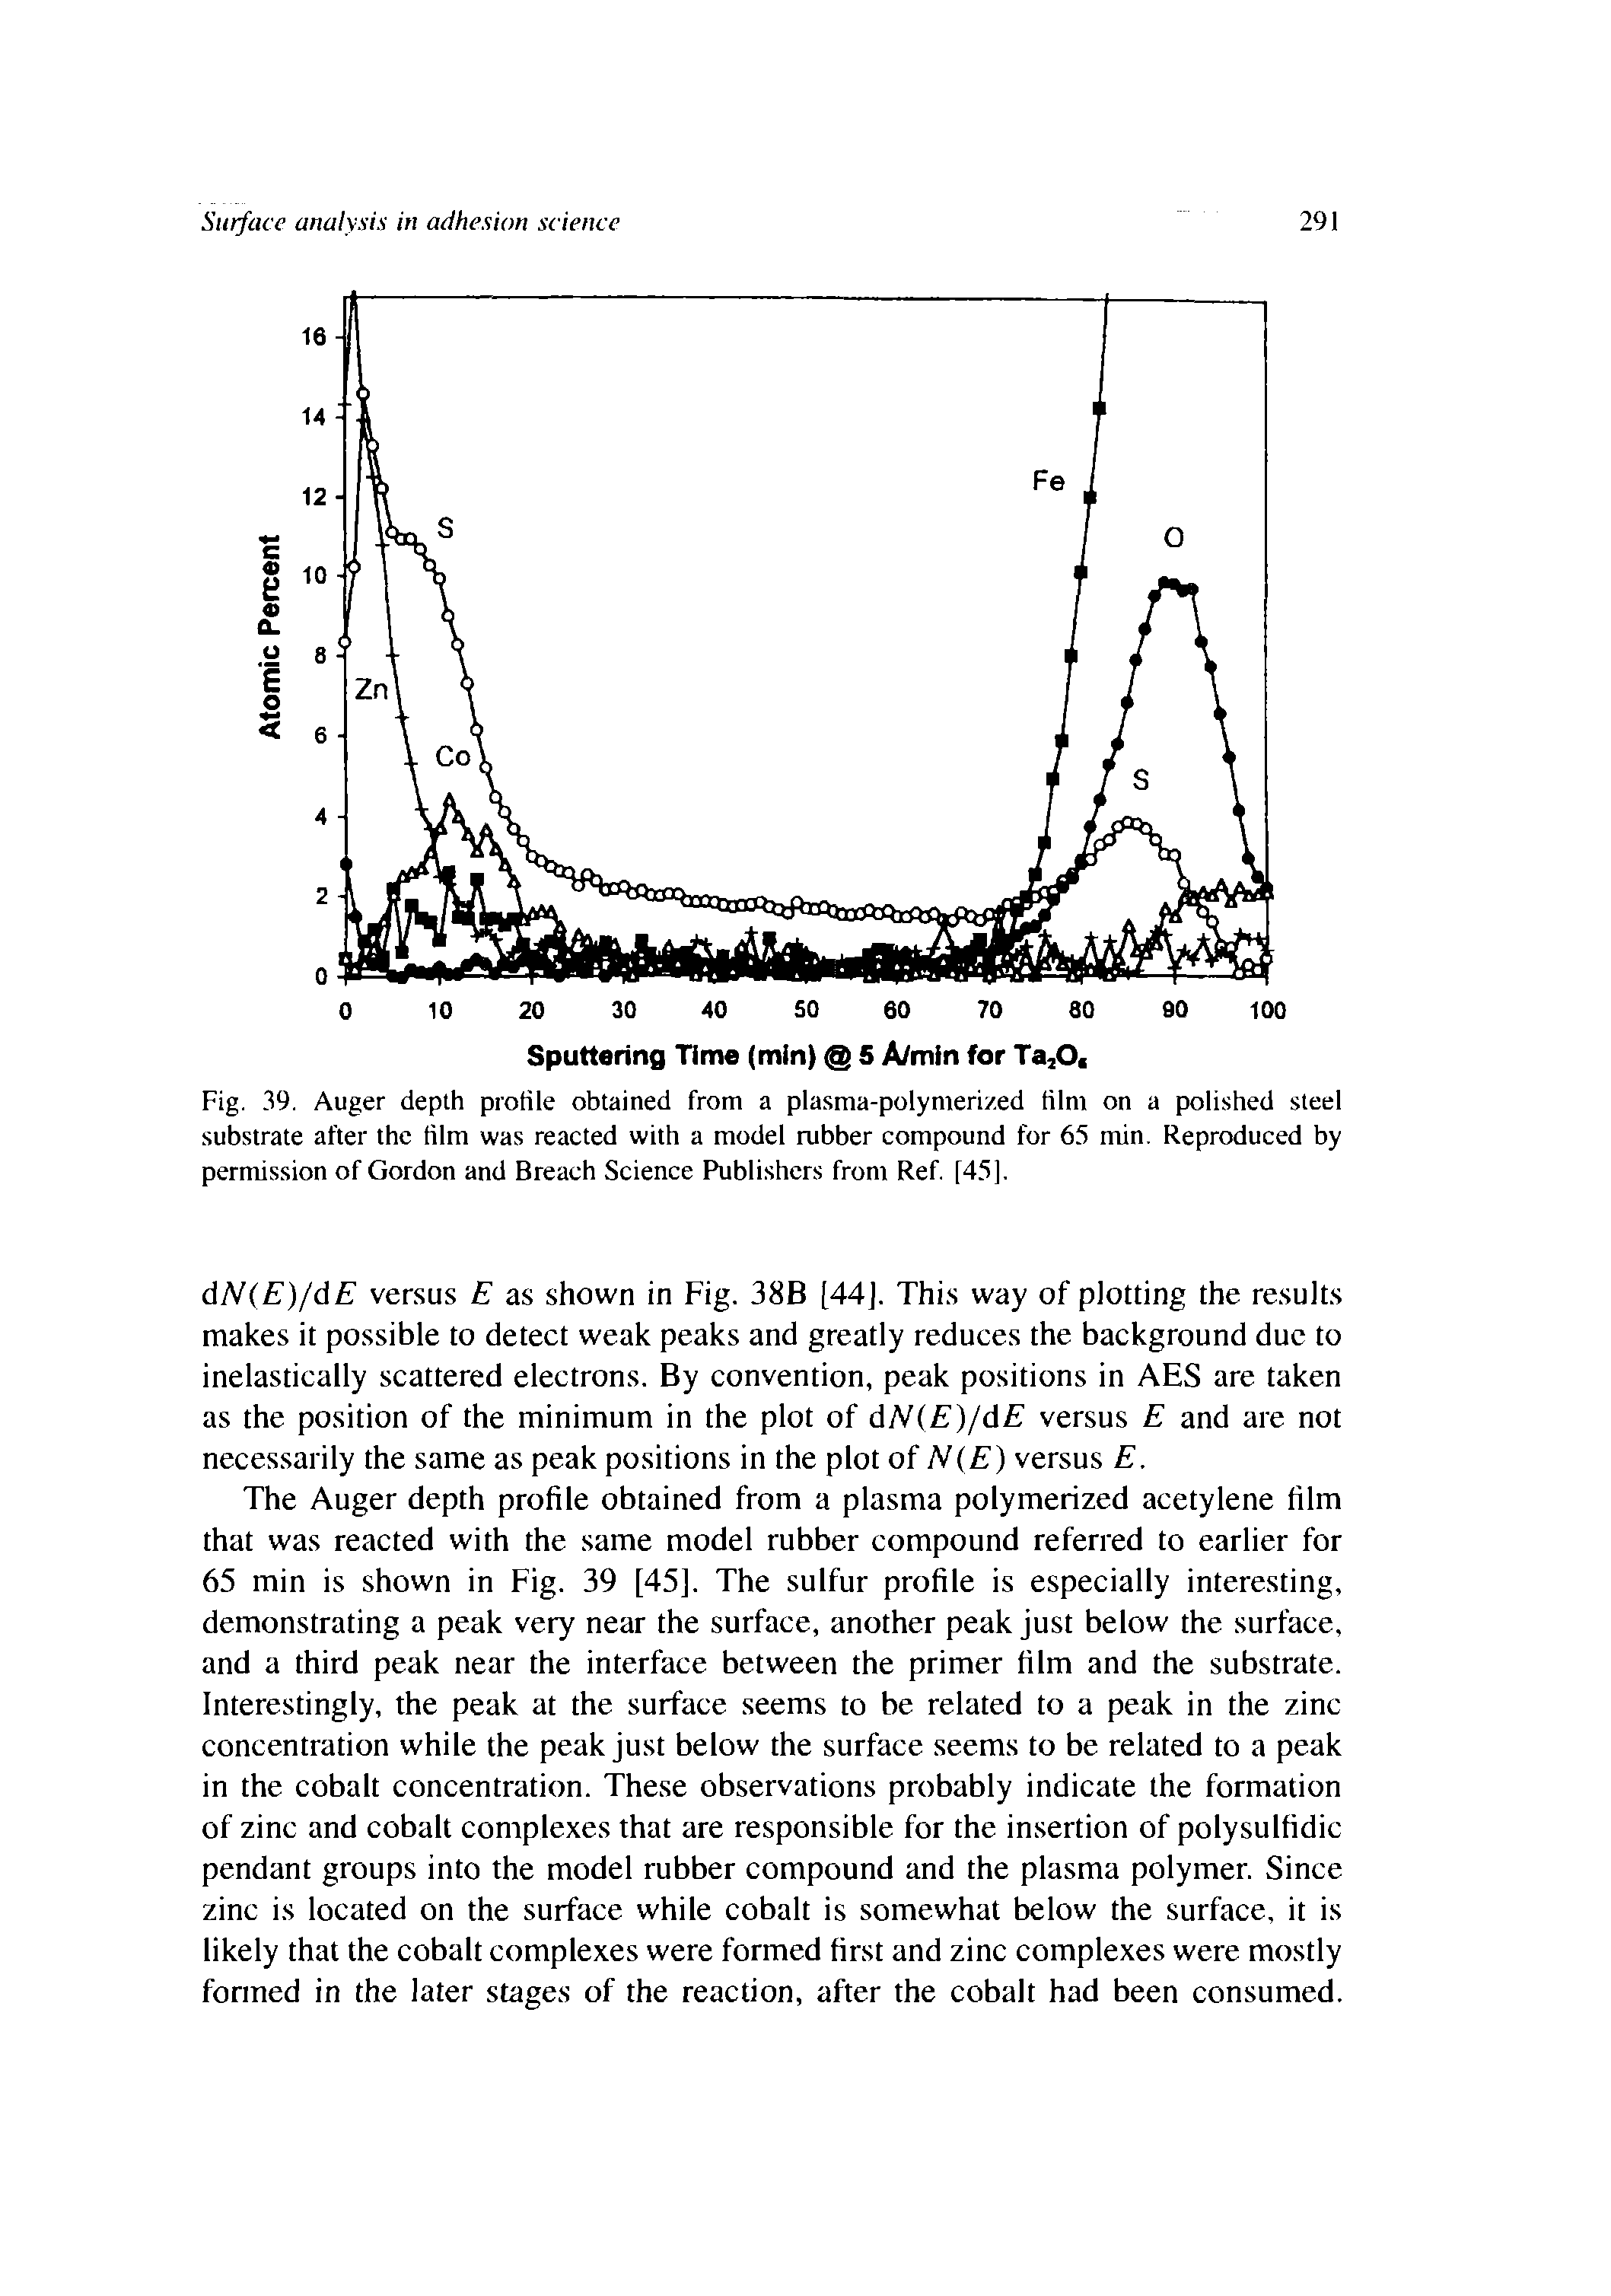 Fig. 39. Auger depth protile obtained from a plasma-polymerized film on a polished steel substrate after the film was reacted with a model rubber compound for 65 min. Reproduced by permission of Gordon and Breach Science Publishers from Ref [45].